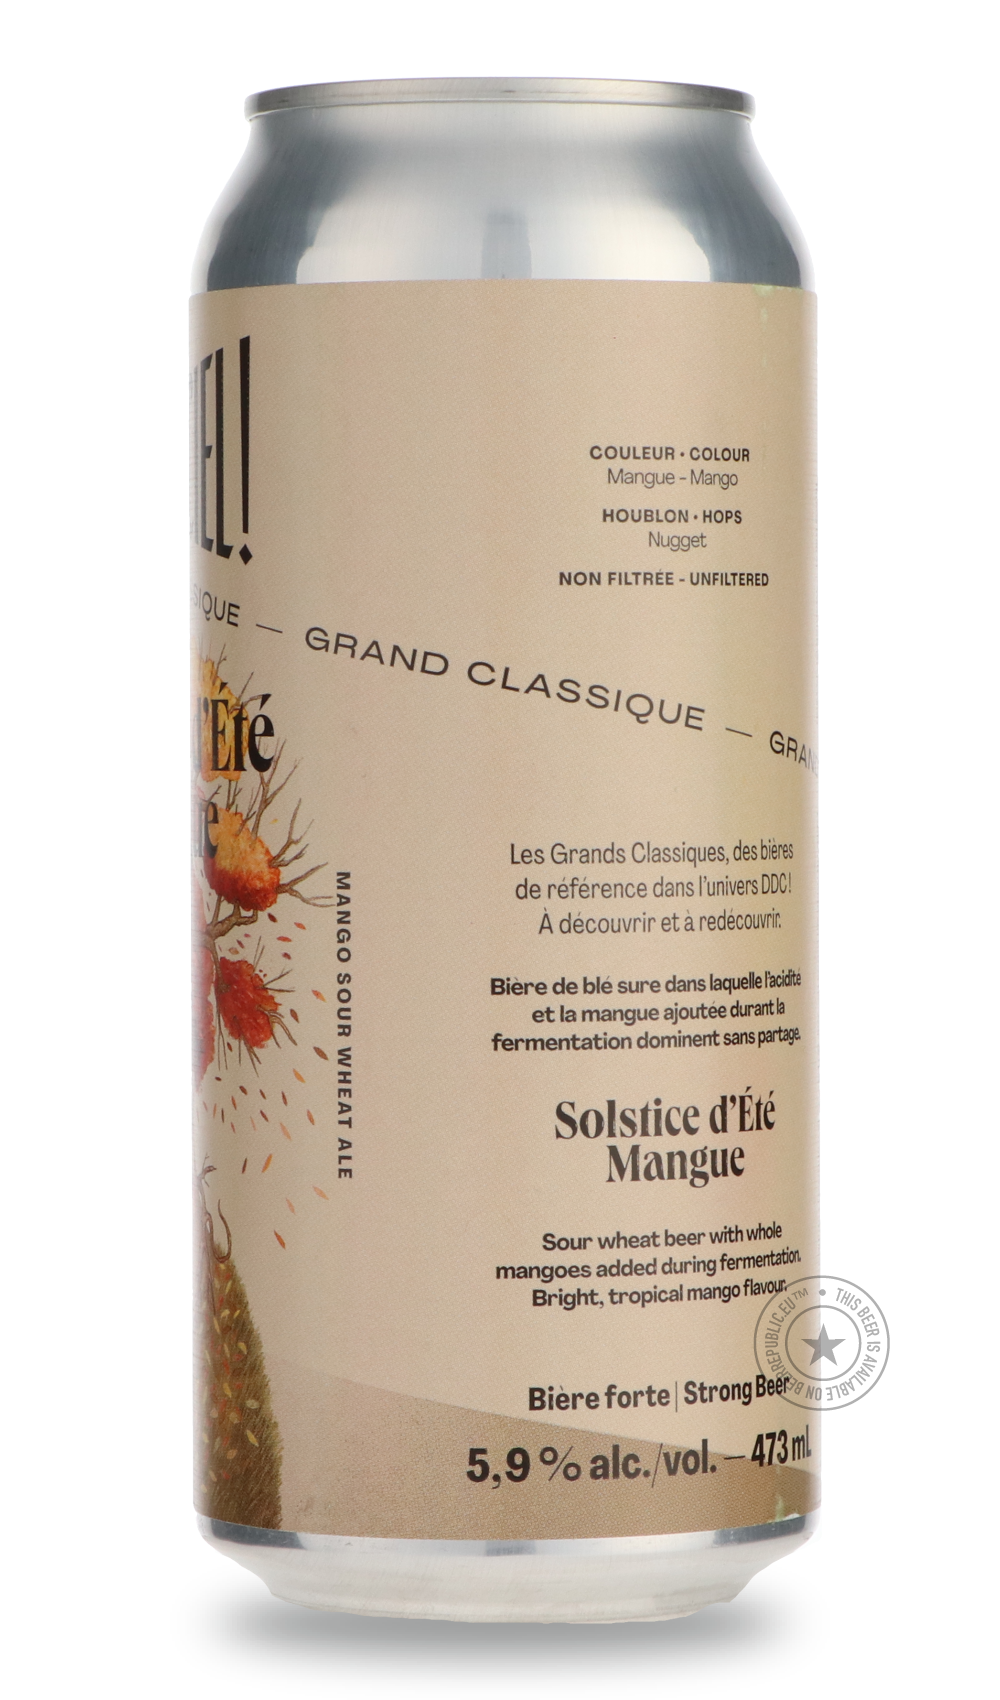 -Dieu du Ciel- Solstice D'Été (Mangue)-Sour / Wild & Fruity- Only @ Beer Republic - The best online beer store for American & Canadian craft beer - Buy beer online from the USA and Canada - Bier online kopen - Amerikaans bier kopen - Craft beer store - Craft beer kopen - Amerikanisch bier kaufen - Bier online kaufen - Acheter biere online - IPA - Stout - Porter - New England IPA - Hazy IPA - Imperial Stout - Barrel Aged - Barrel Aged Imperial Stout - Brown - Dark beer - Blond - Blonde - Pilsner - Lager - Wh